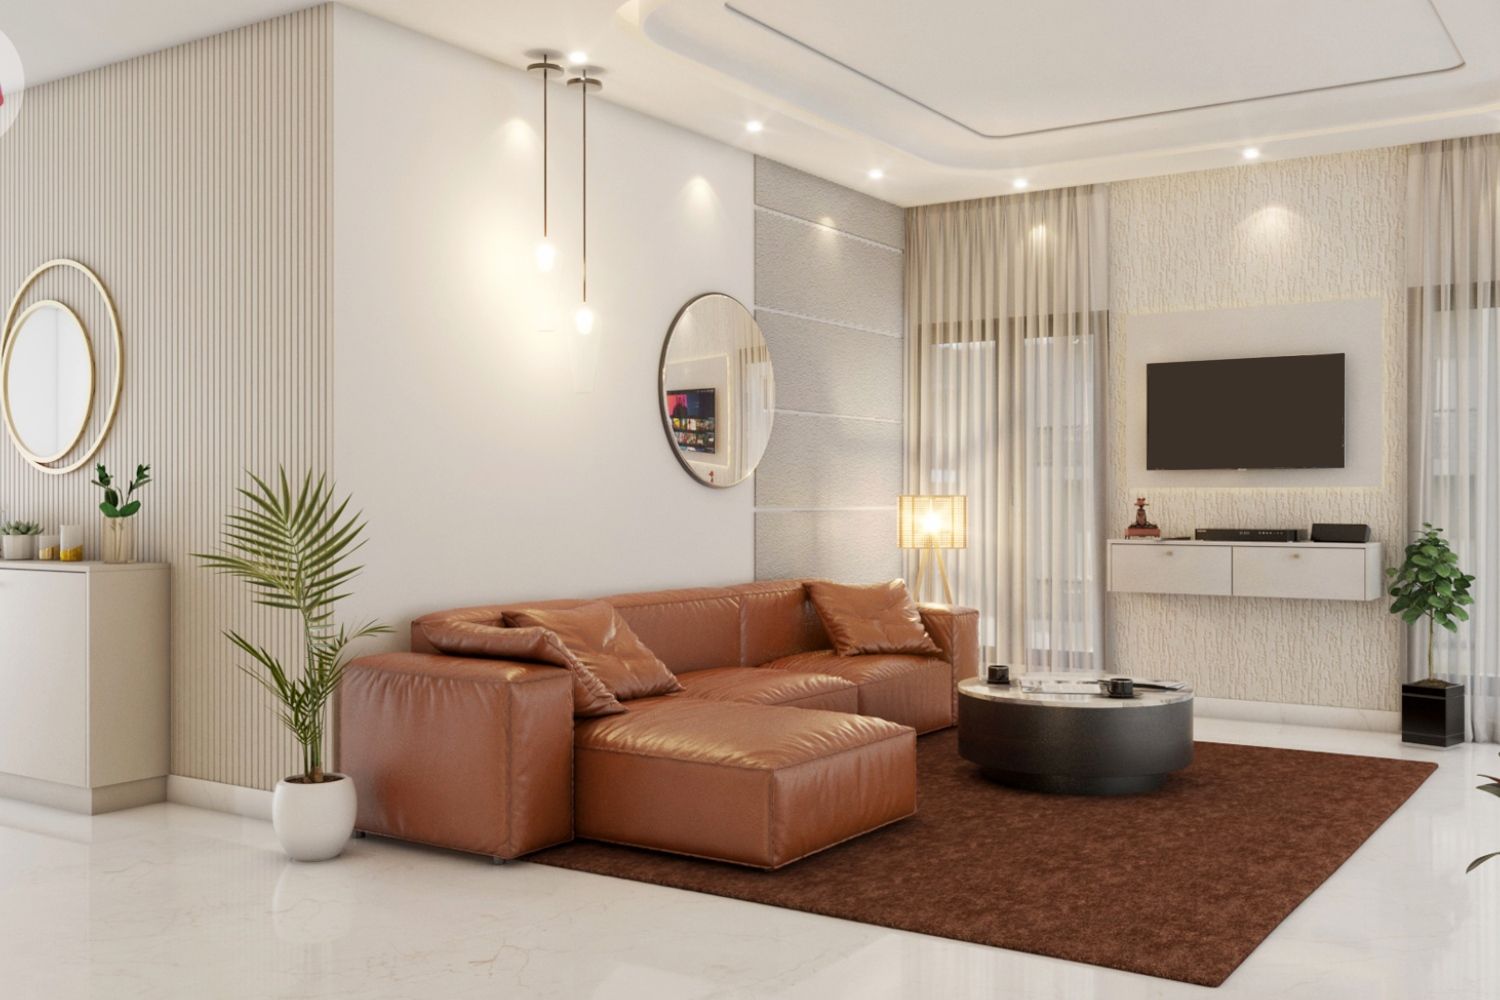 Modern Living Room Design With L-Shaped Faux Leather Brown Sofa And Textured Walls